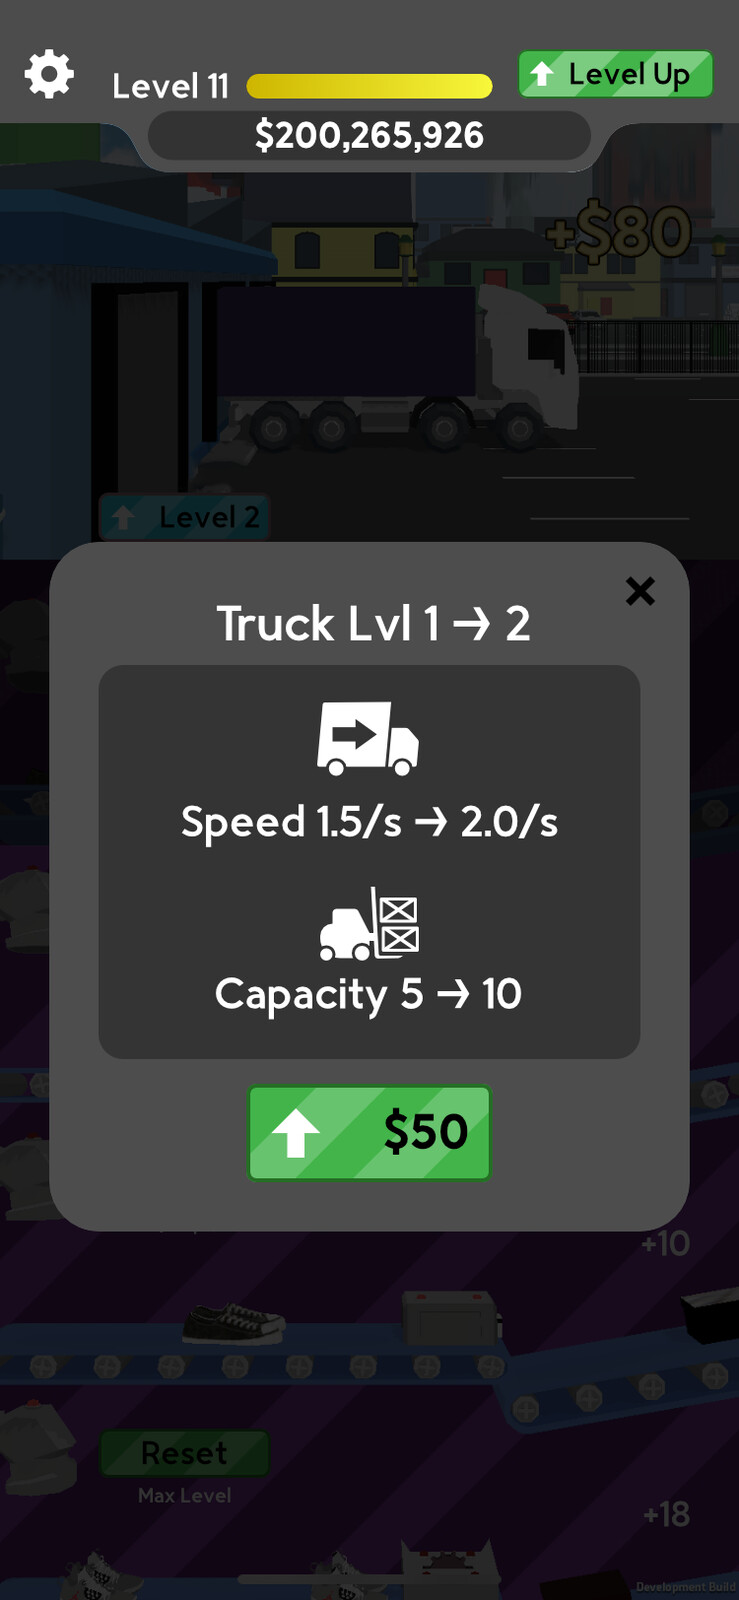 Truck upgrade popup window. 

Custom UI and icons made with Affinity Designer.